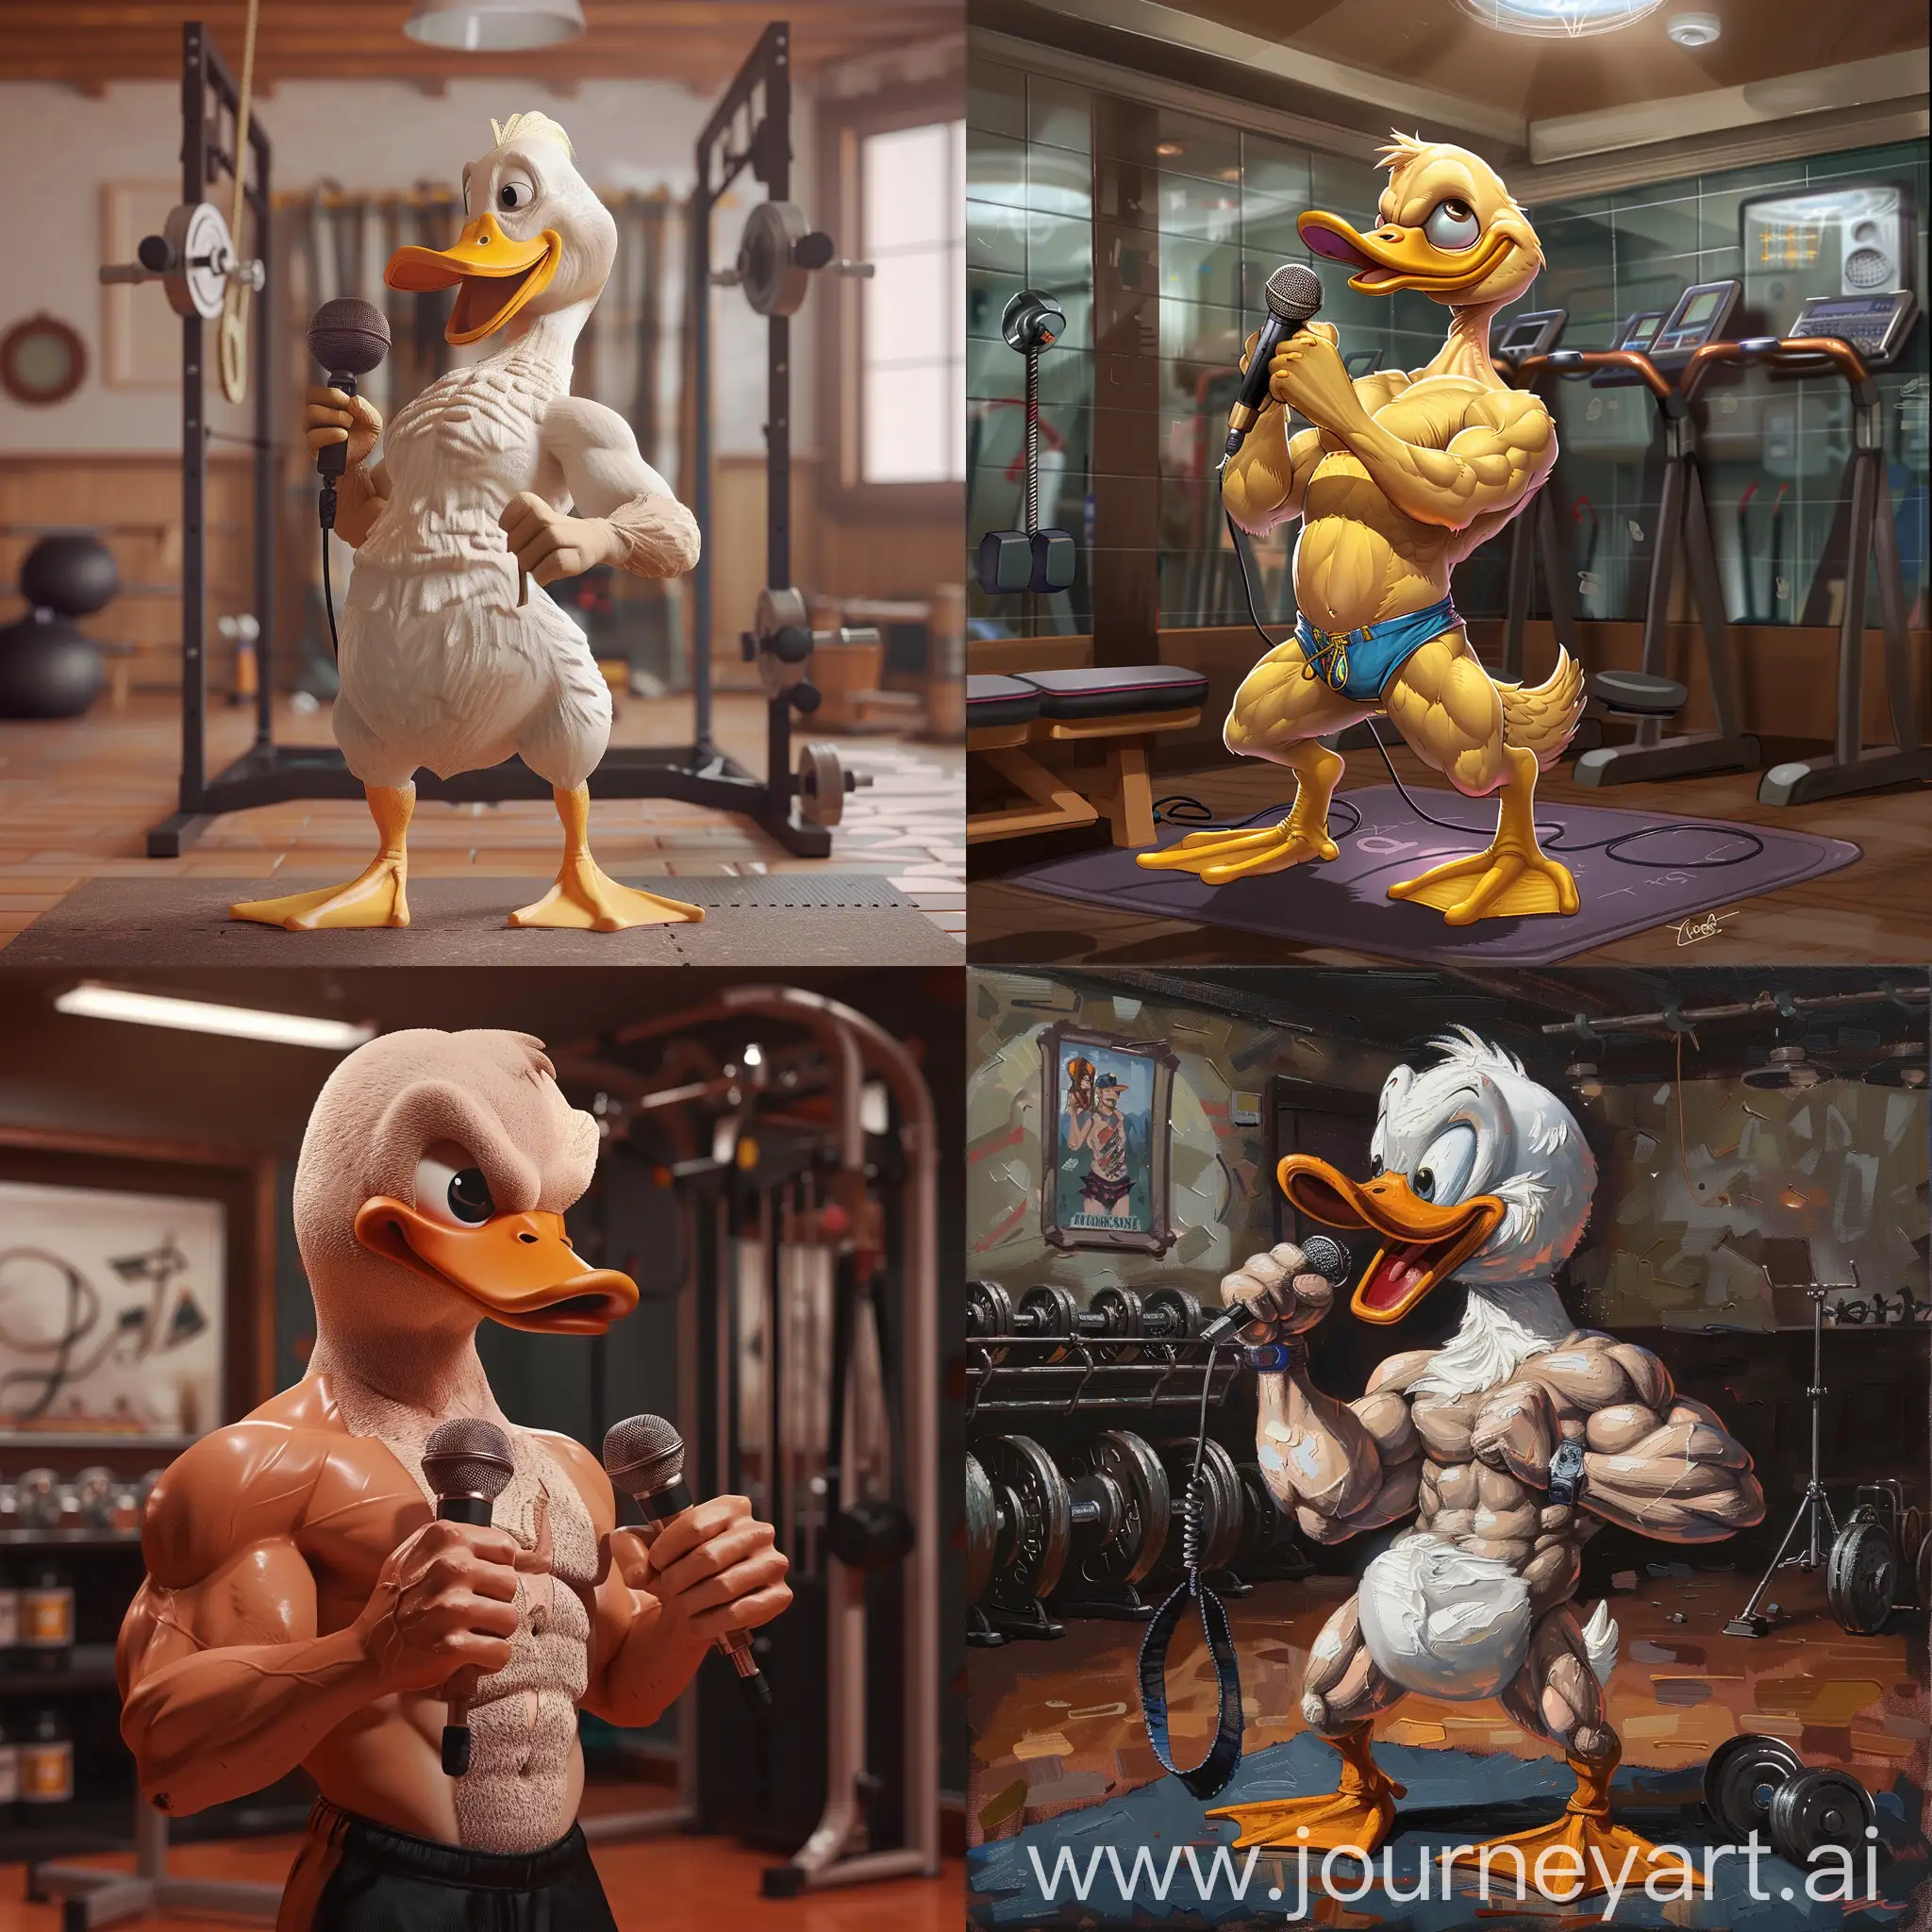 Muscular-Duck-with-Microphone-in-DisneyStyle-Workout-Room